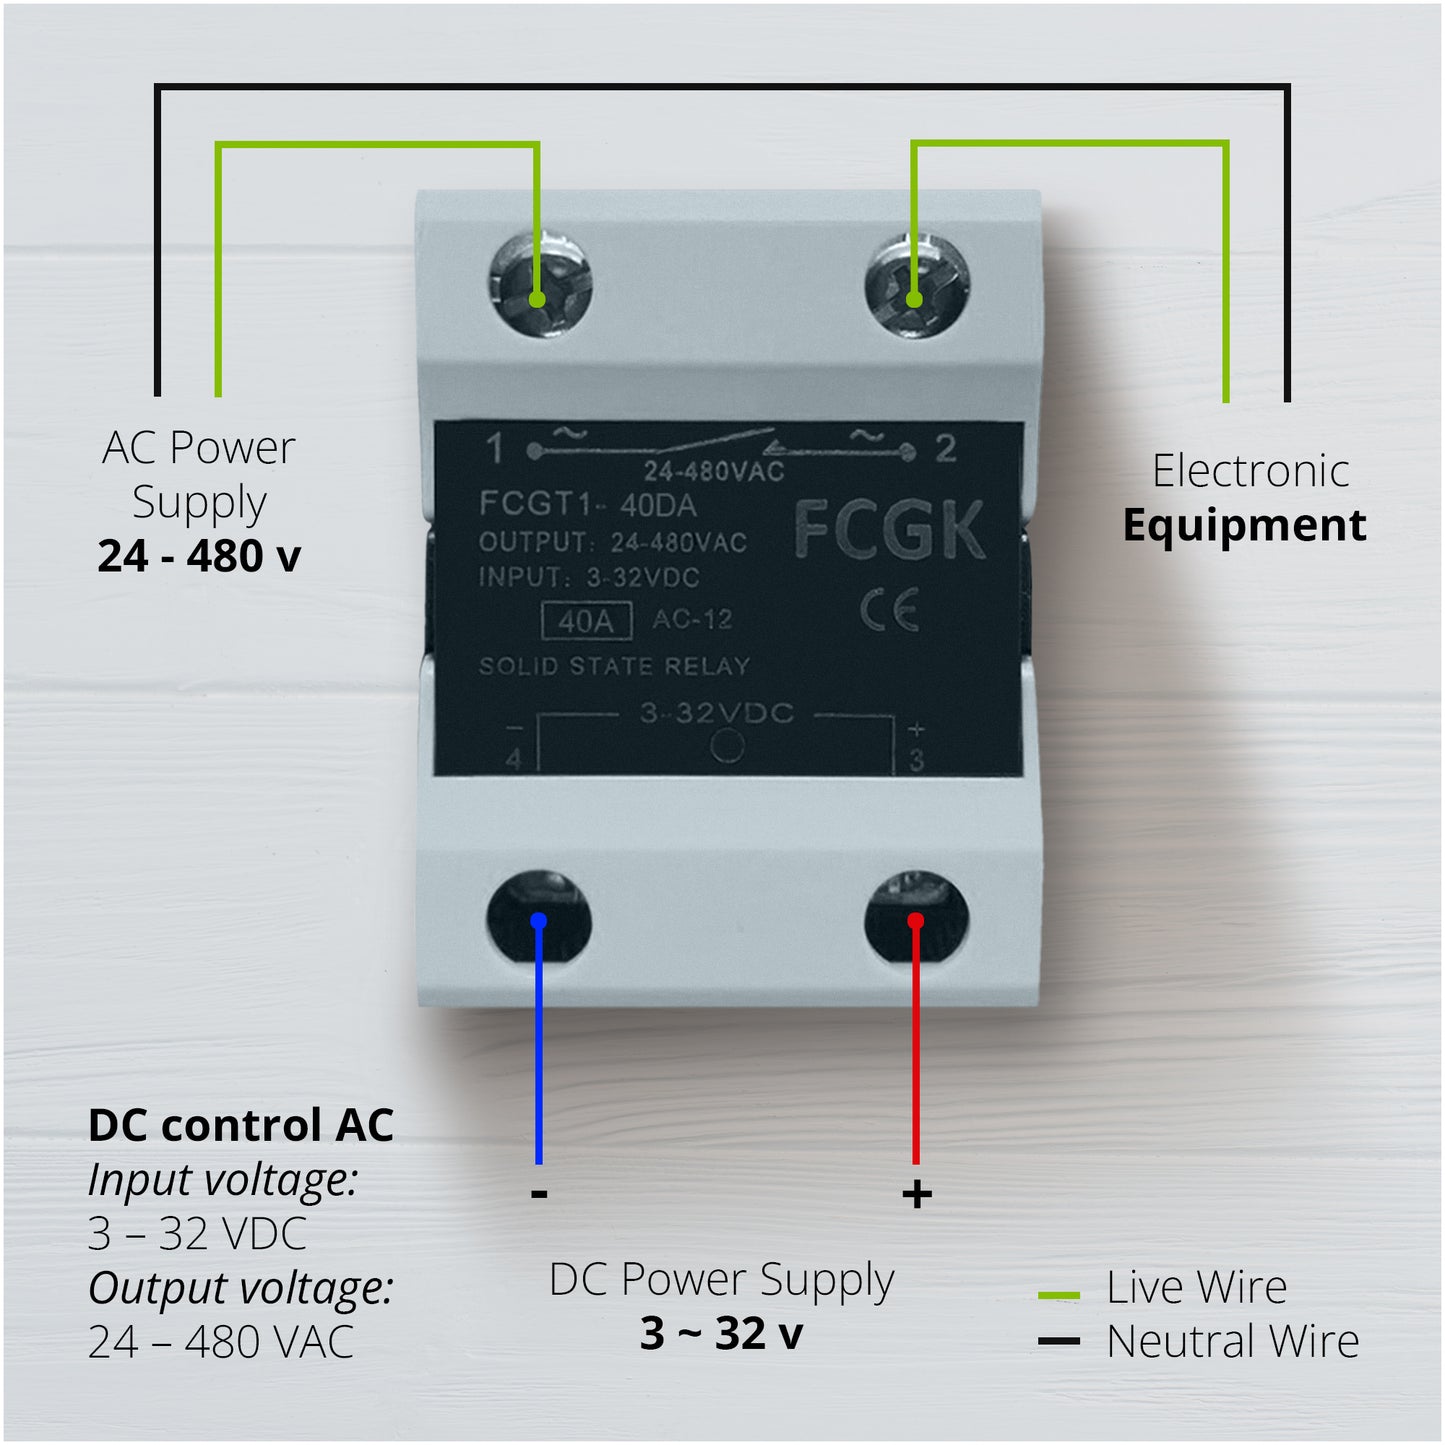 FCGK Solid State Relay SSR-40DA DC to AC Input 3-32VDC to Output 24-480VAC 40A Single Phase Plastic Cover